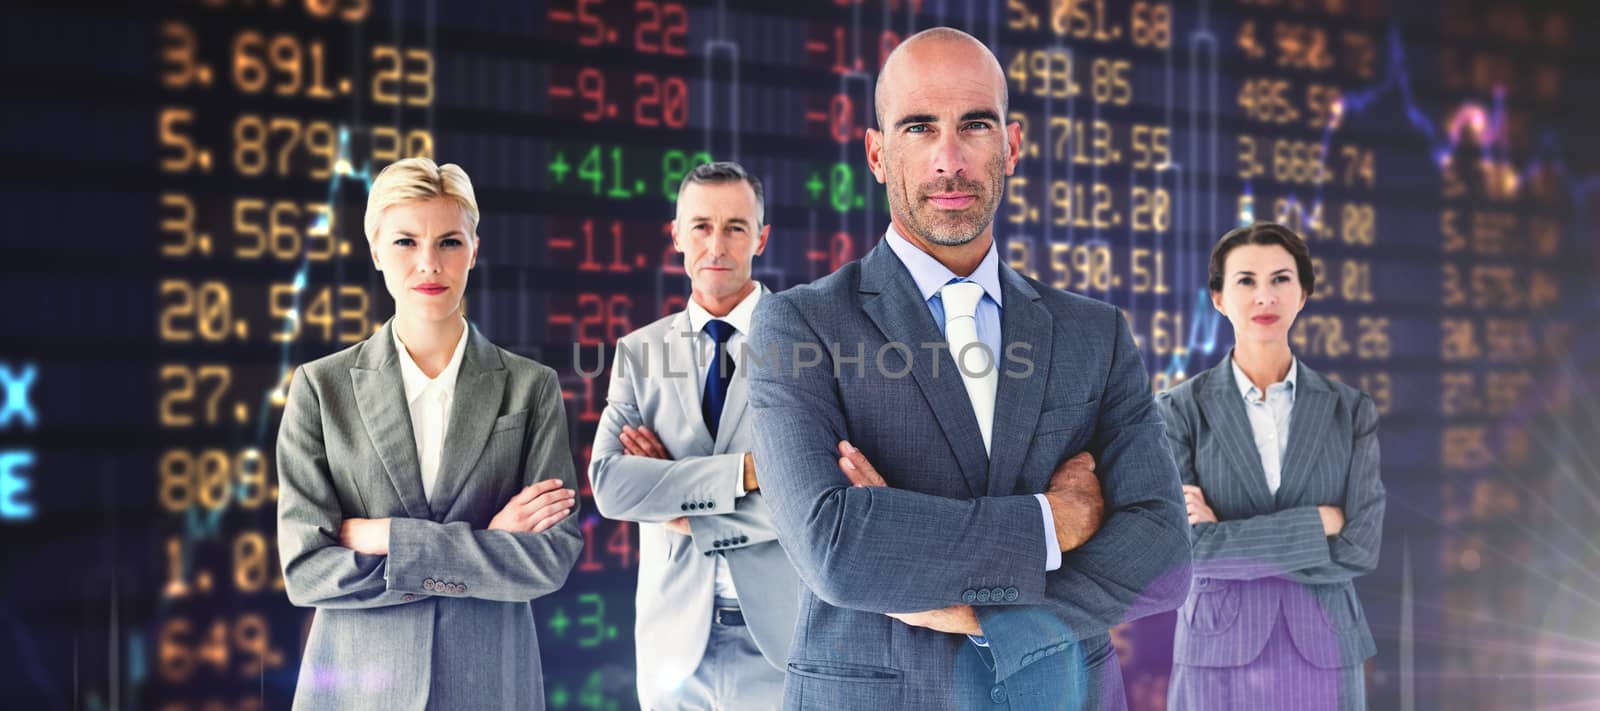 Business colleagues smiling at camera against stocks and shares